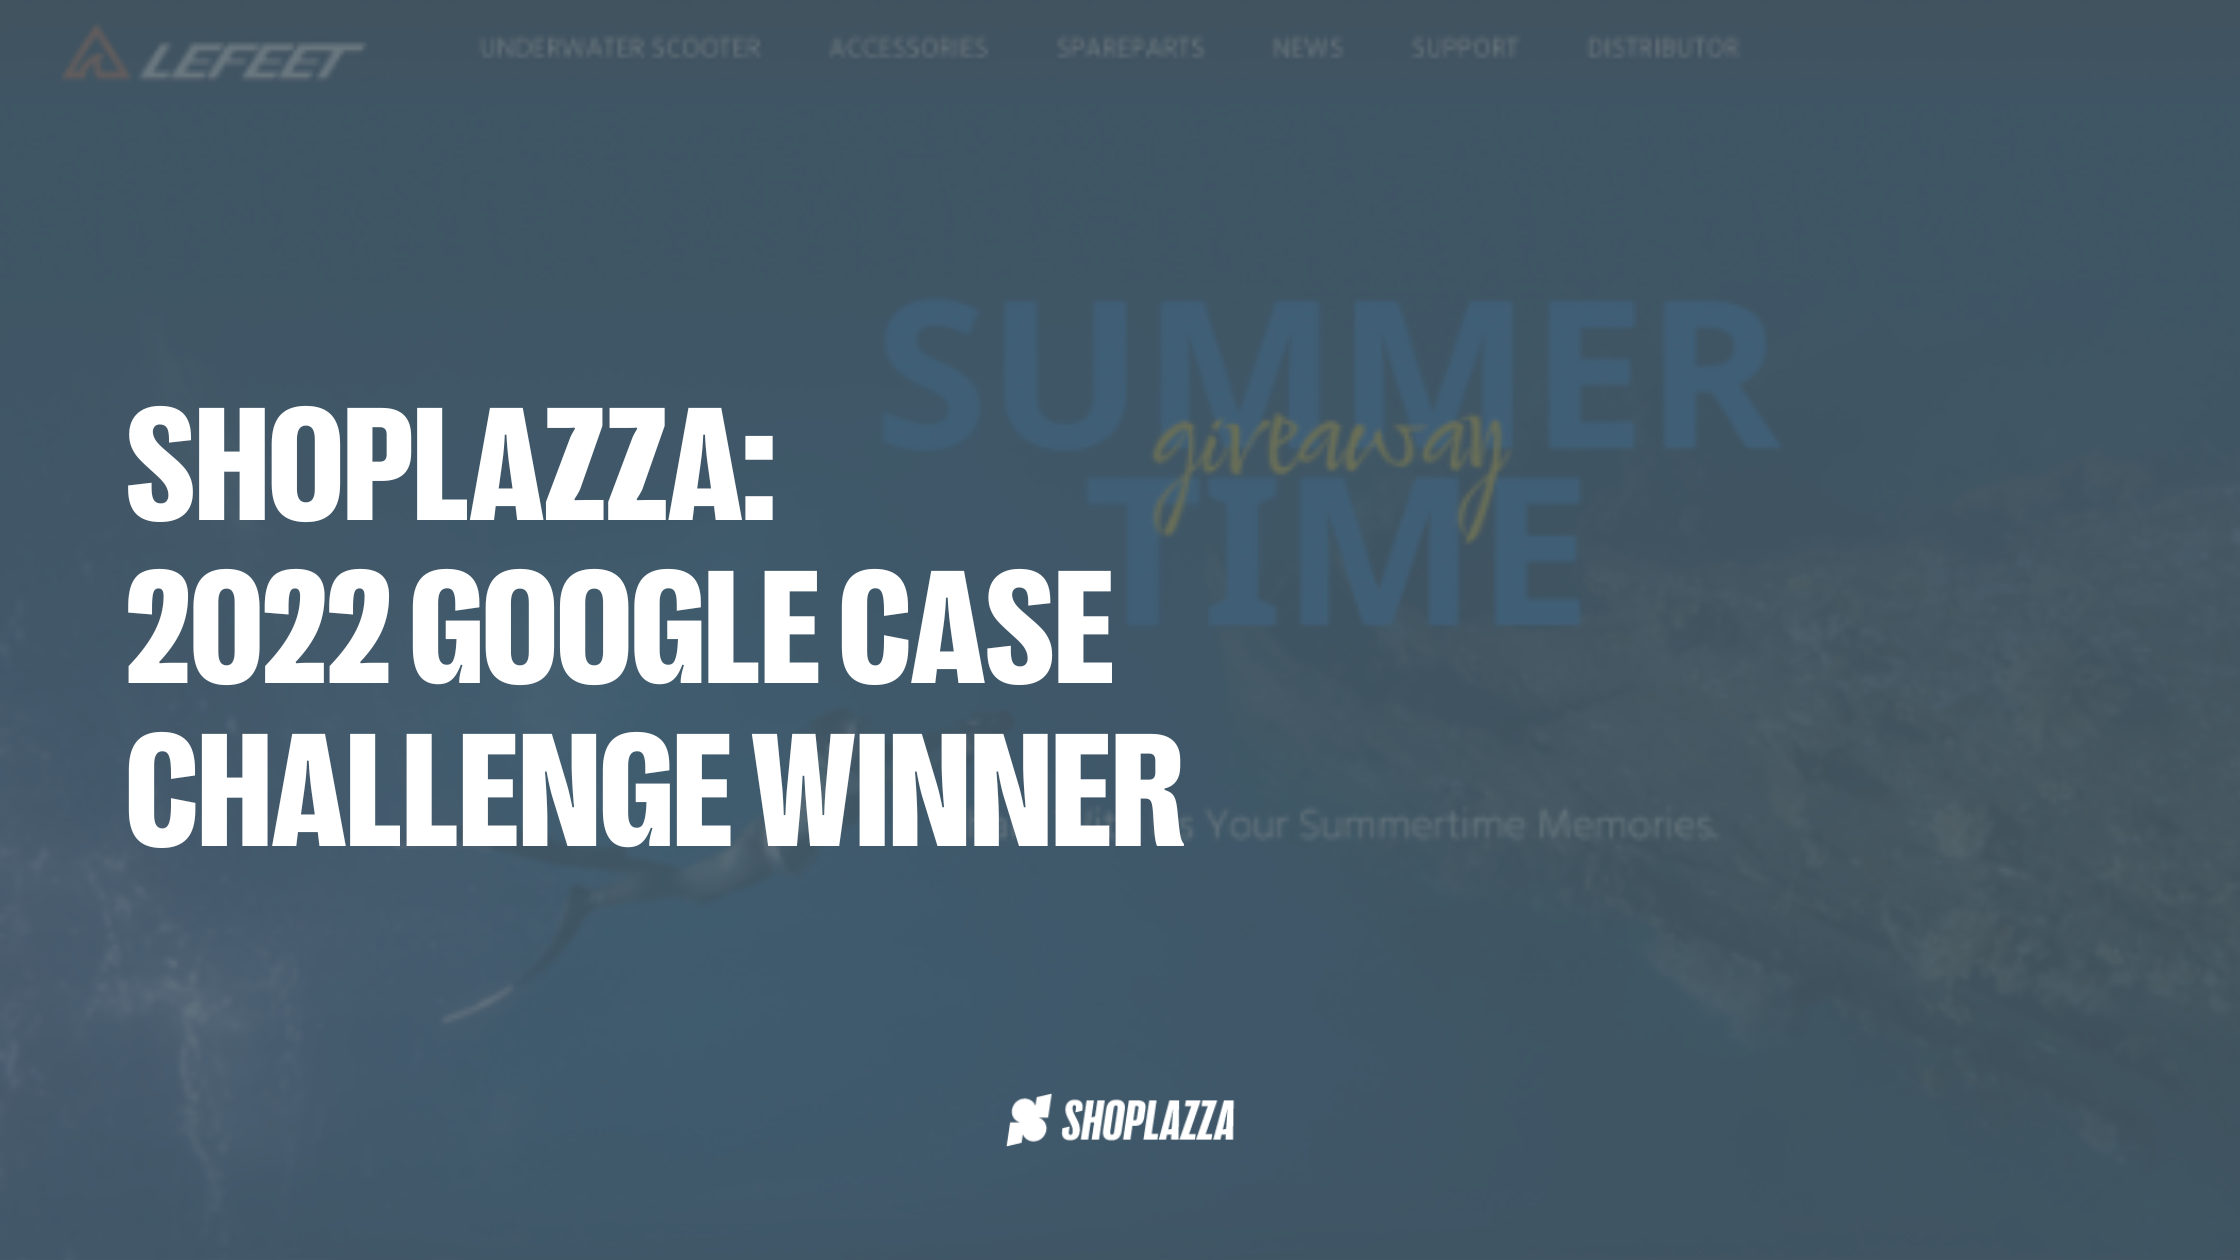 Cover image shows the words: Shoplazza: 2022 Google Case Challenge Winner, with Shoplazza's logo at the bottom.